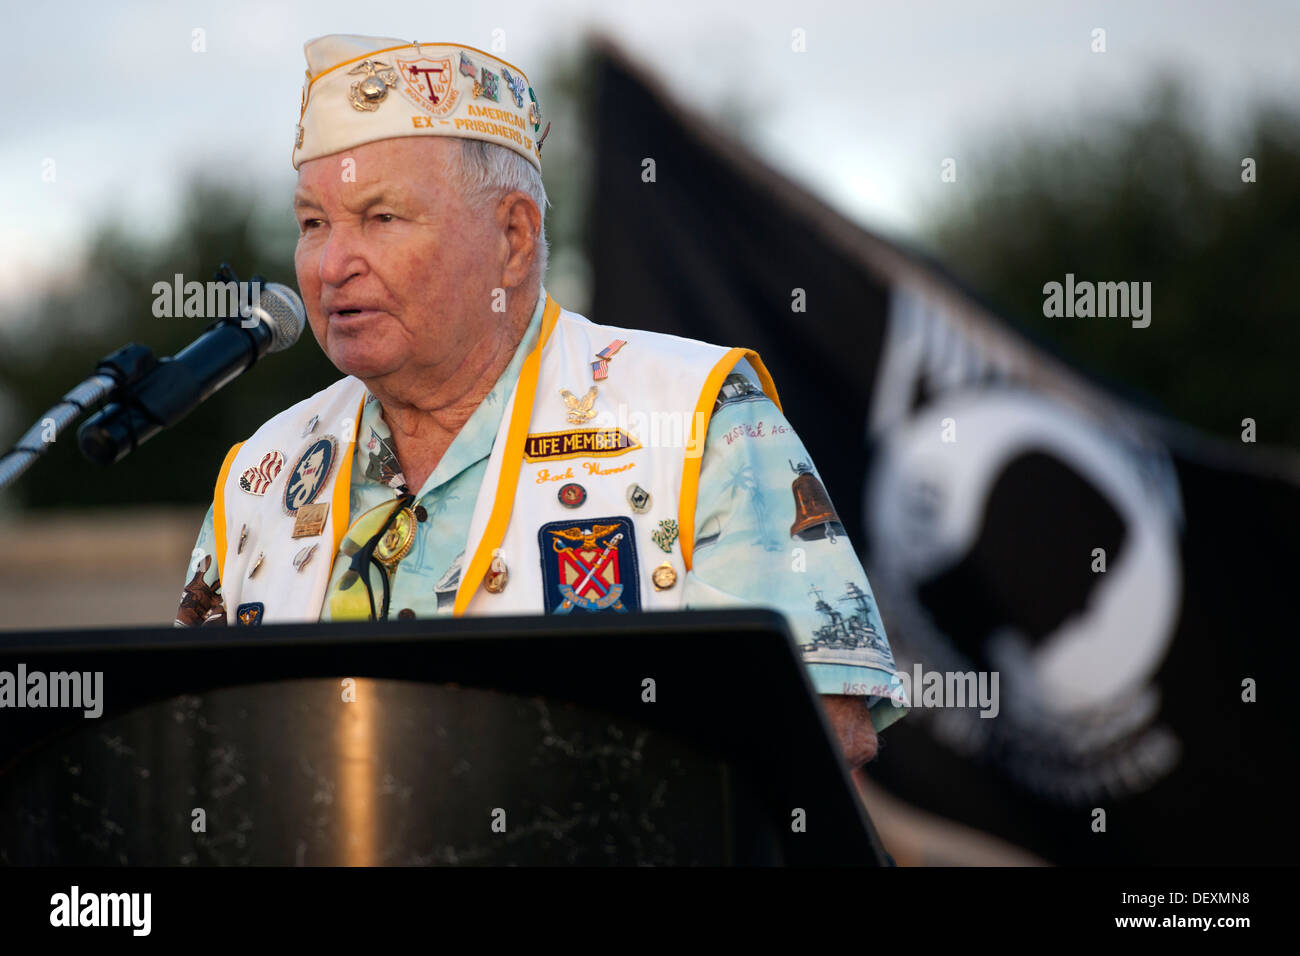 U.S. Marine Sgt. Jack Warner, former prisoner of war, gives a speech on his account as Prisoners of War and Missing in Action during the third annual Prisoners of War and Missing in Action Remembrance Ceremony at the Wings of Freedom Park, Sept. 19. He vi Stock Photo